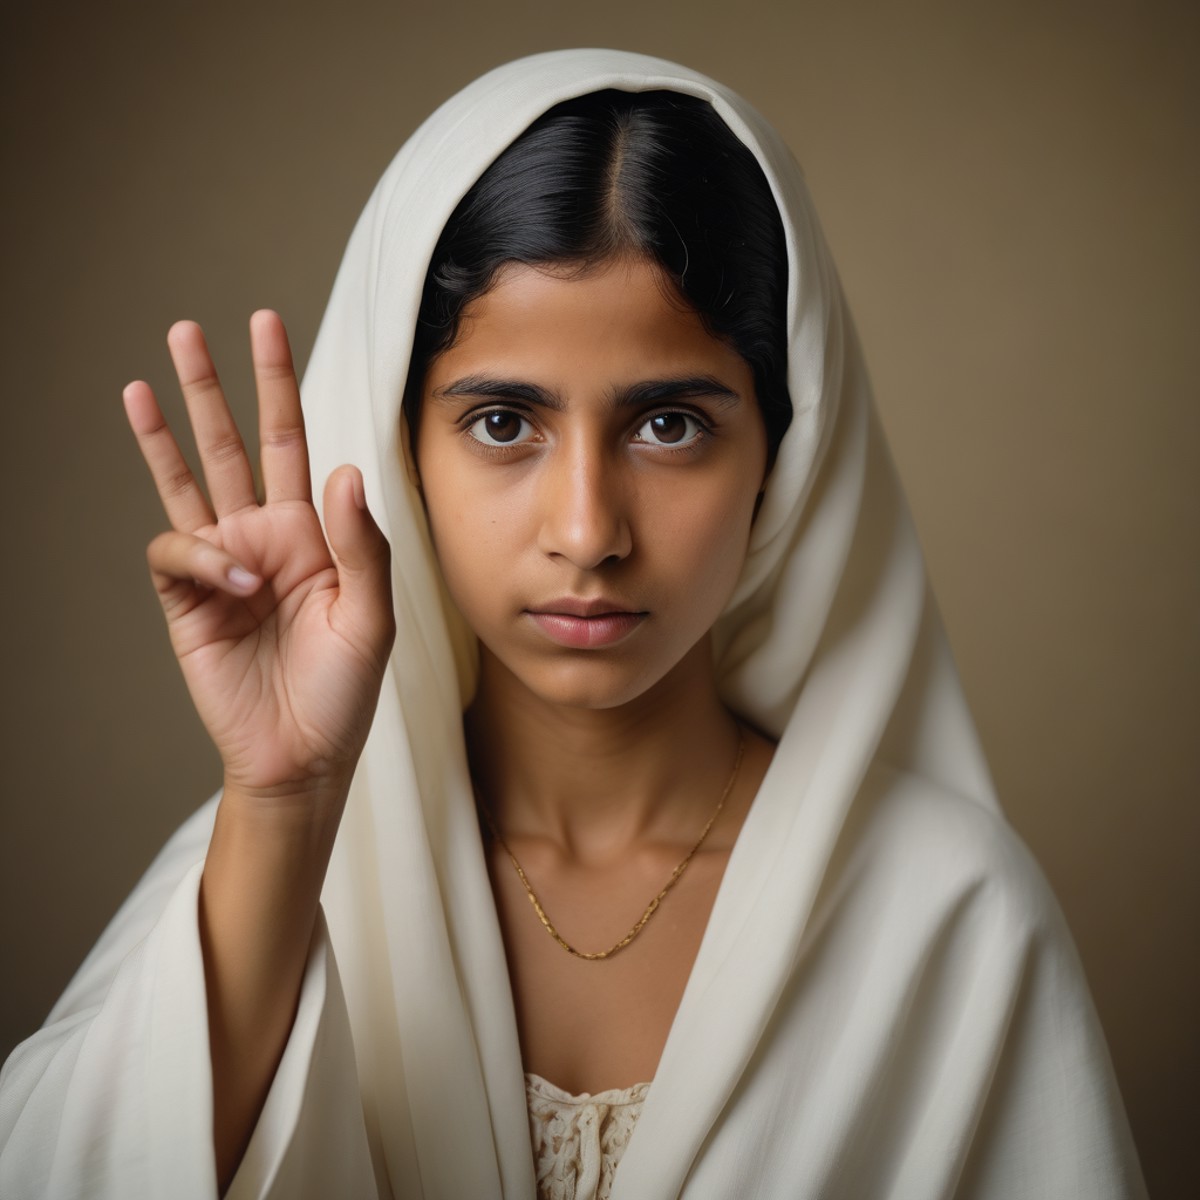 Portrait of Fatima with her hand held up, counting to 4 with her fingers. thumb curled.